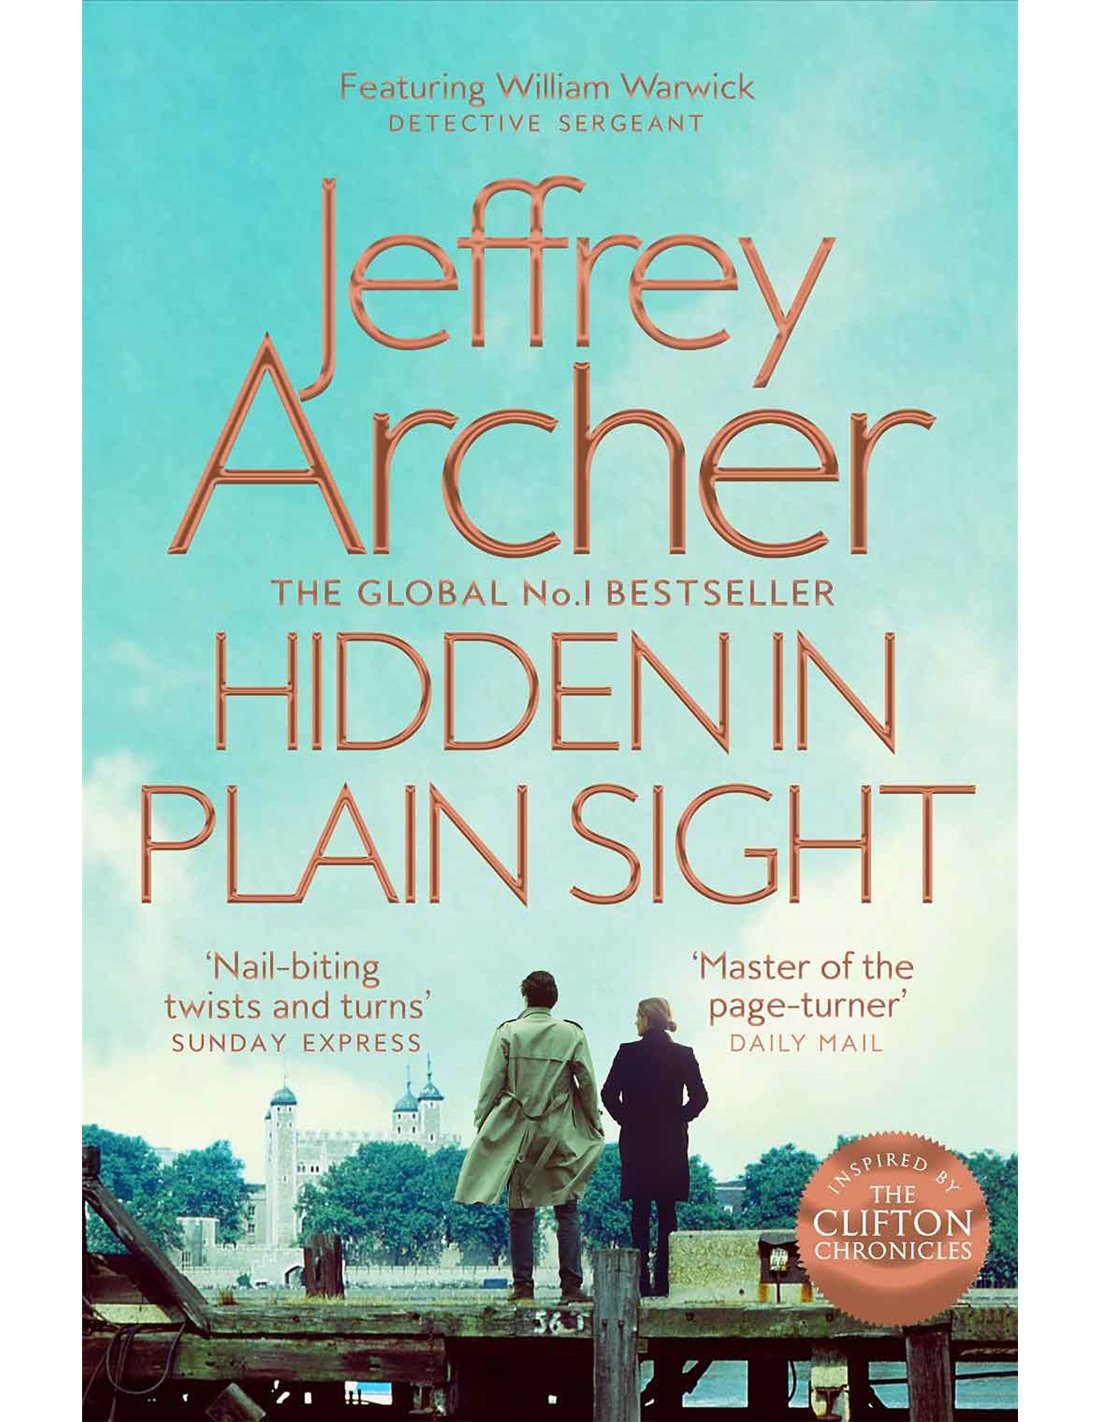 hidden in plain sight movie review